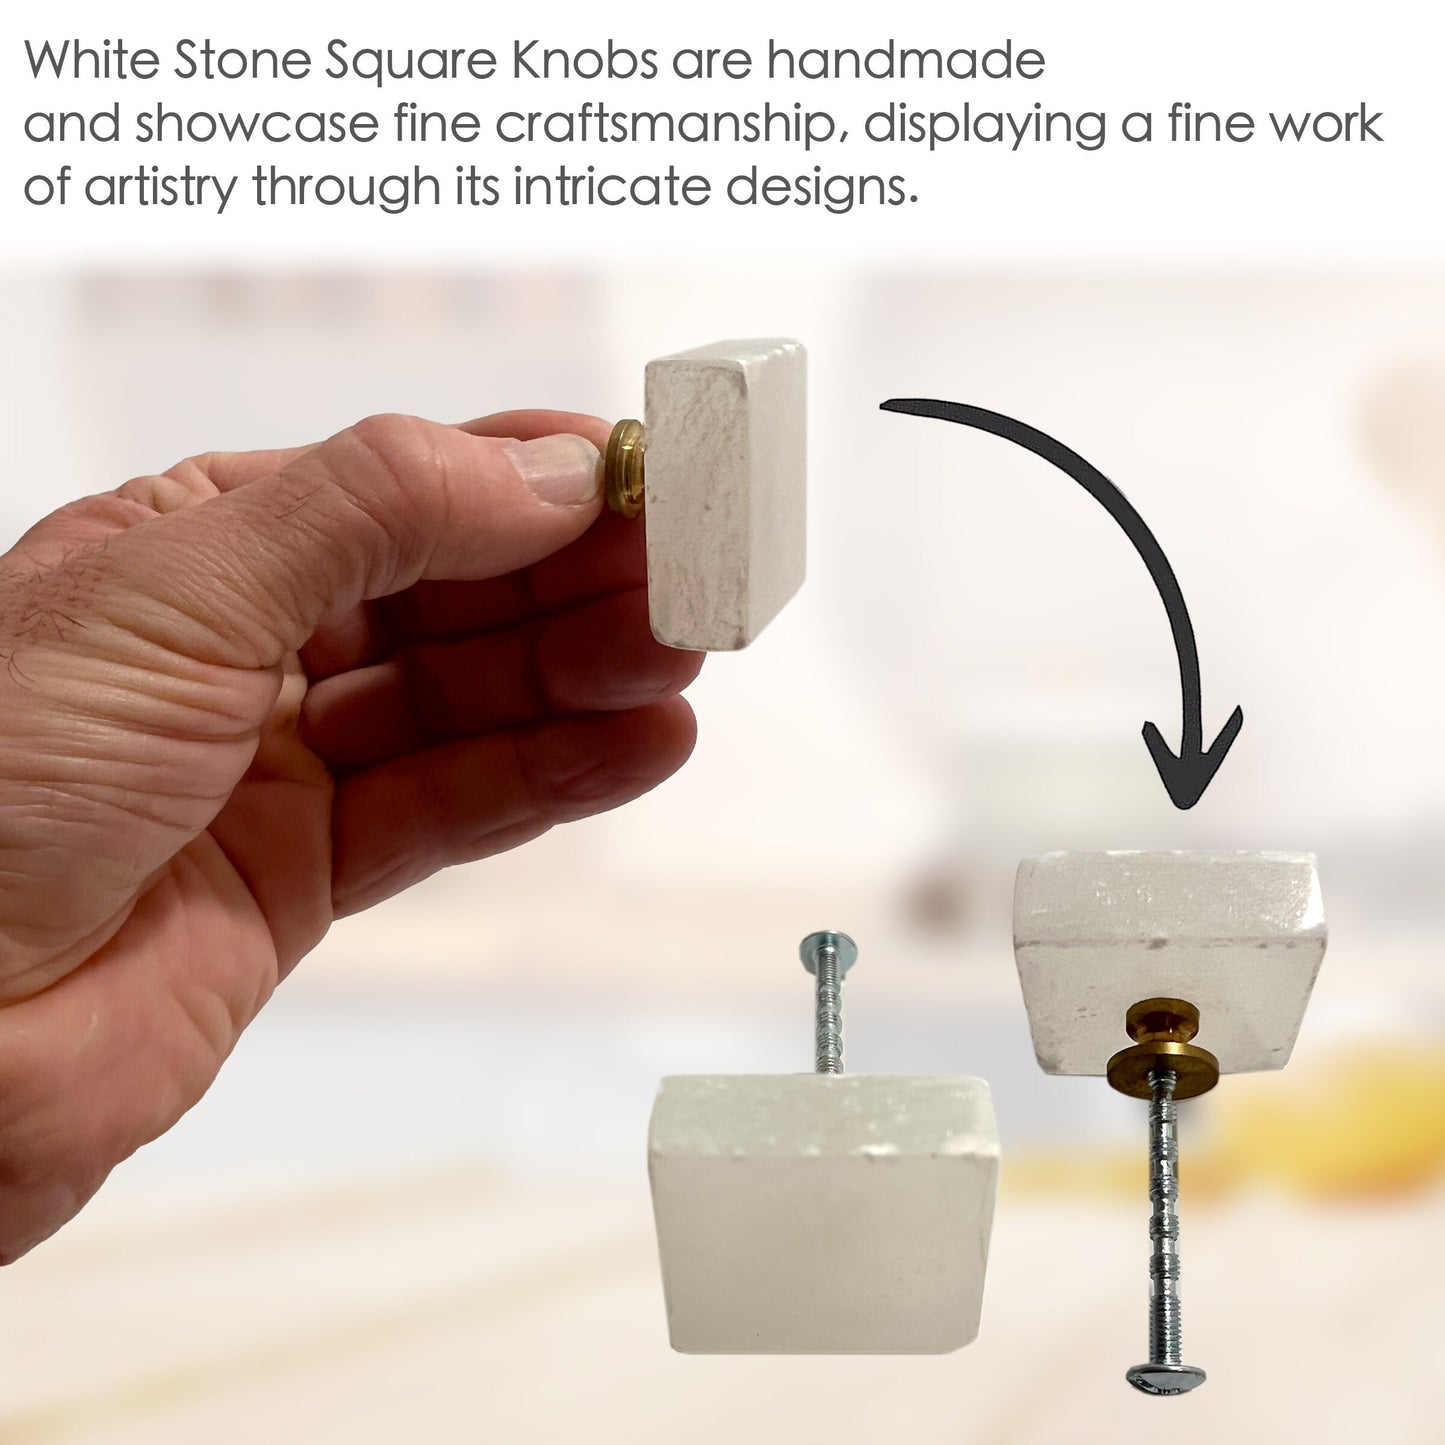 Stone Square Cabinet Knobs 6 Pack Knobs for Cabinets and Drawers, Closet Door Knobs, Drawer Pulls and Knobs with Mounting Screws (White)